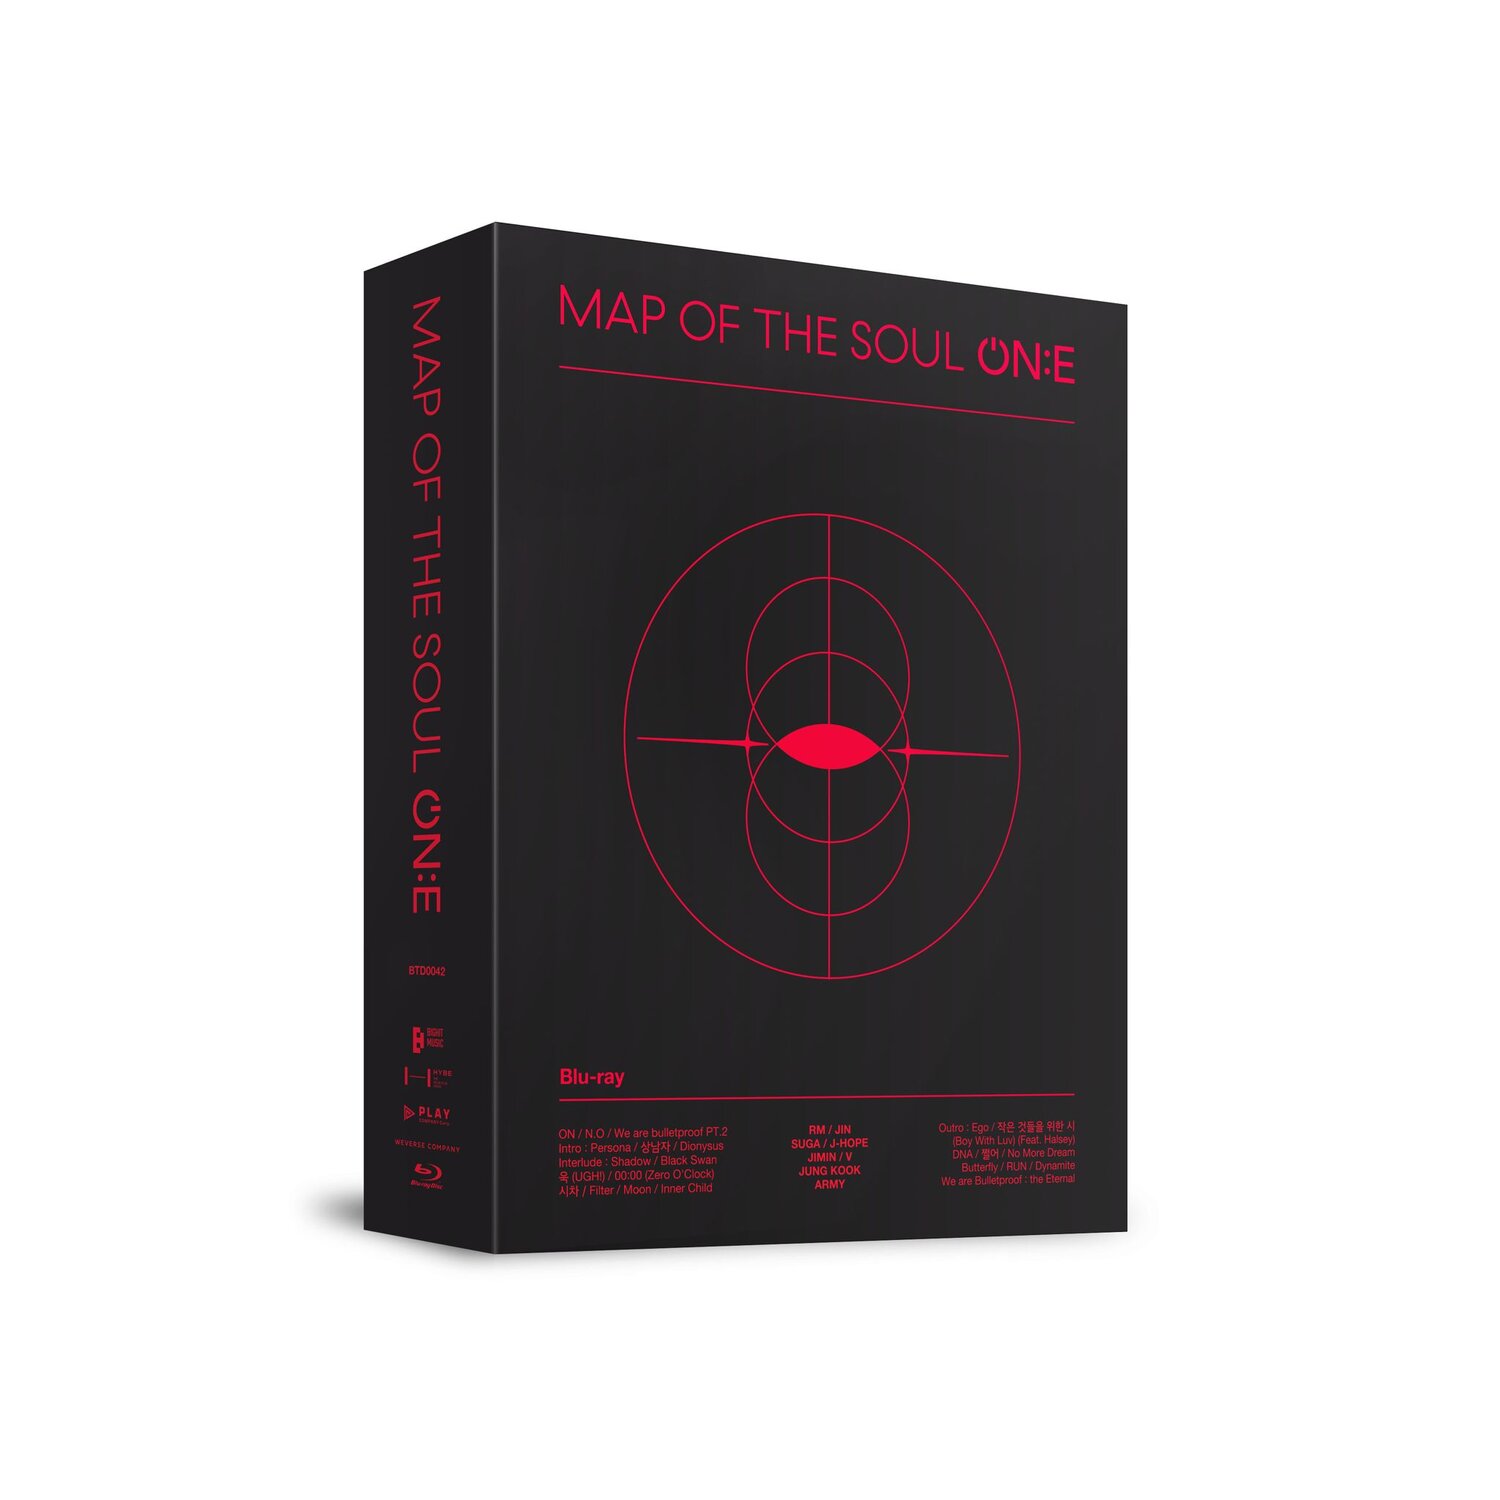 BLU-RAY] MAP OF THE SOUL ON:E Concert — US BTS ARMY